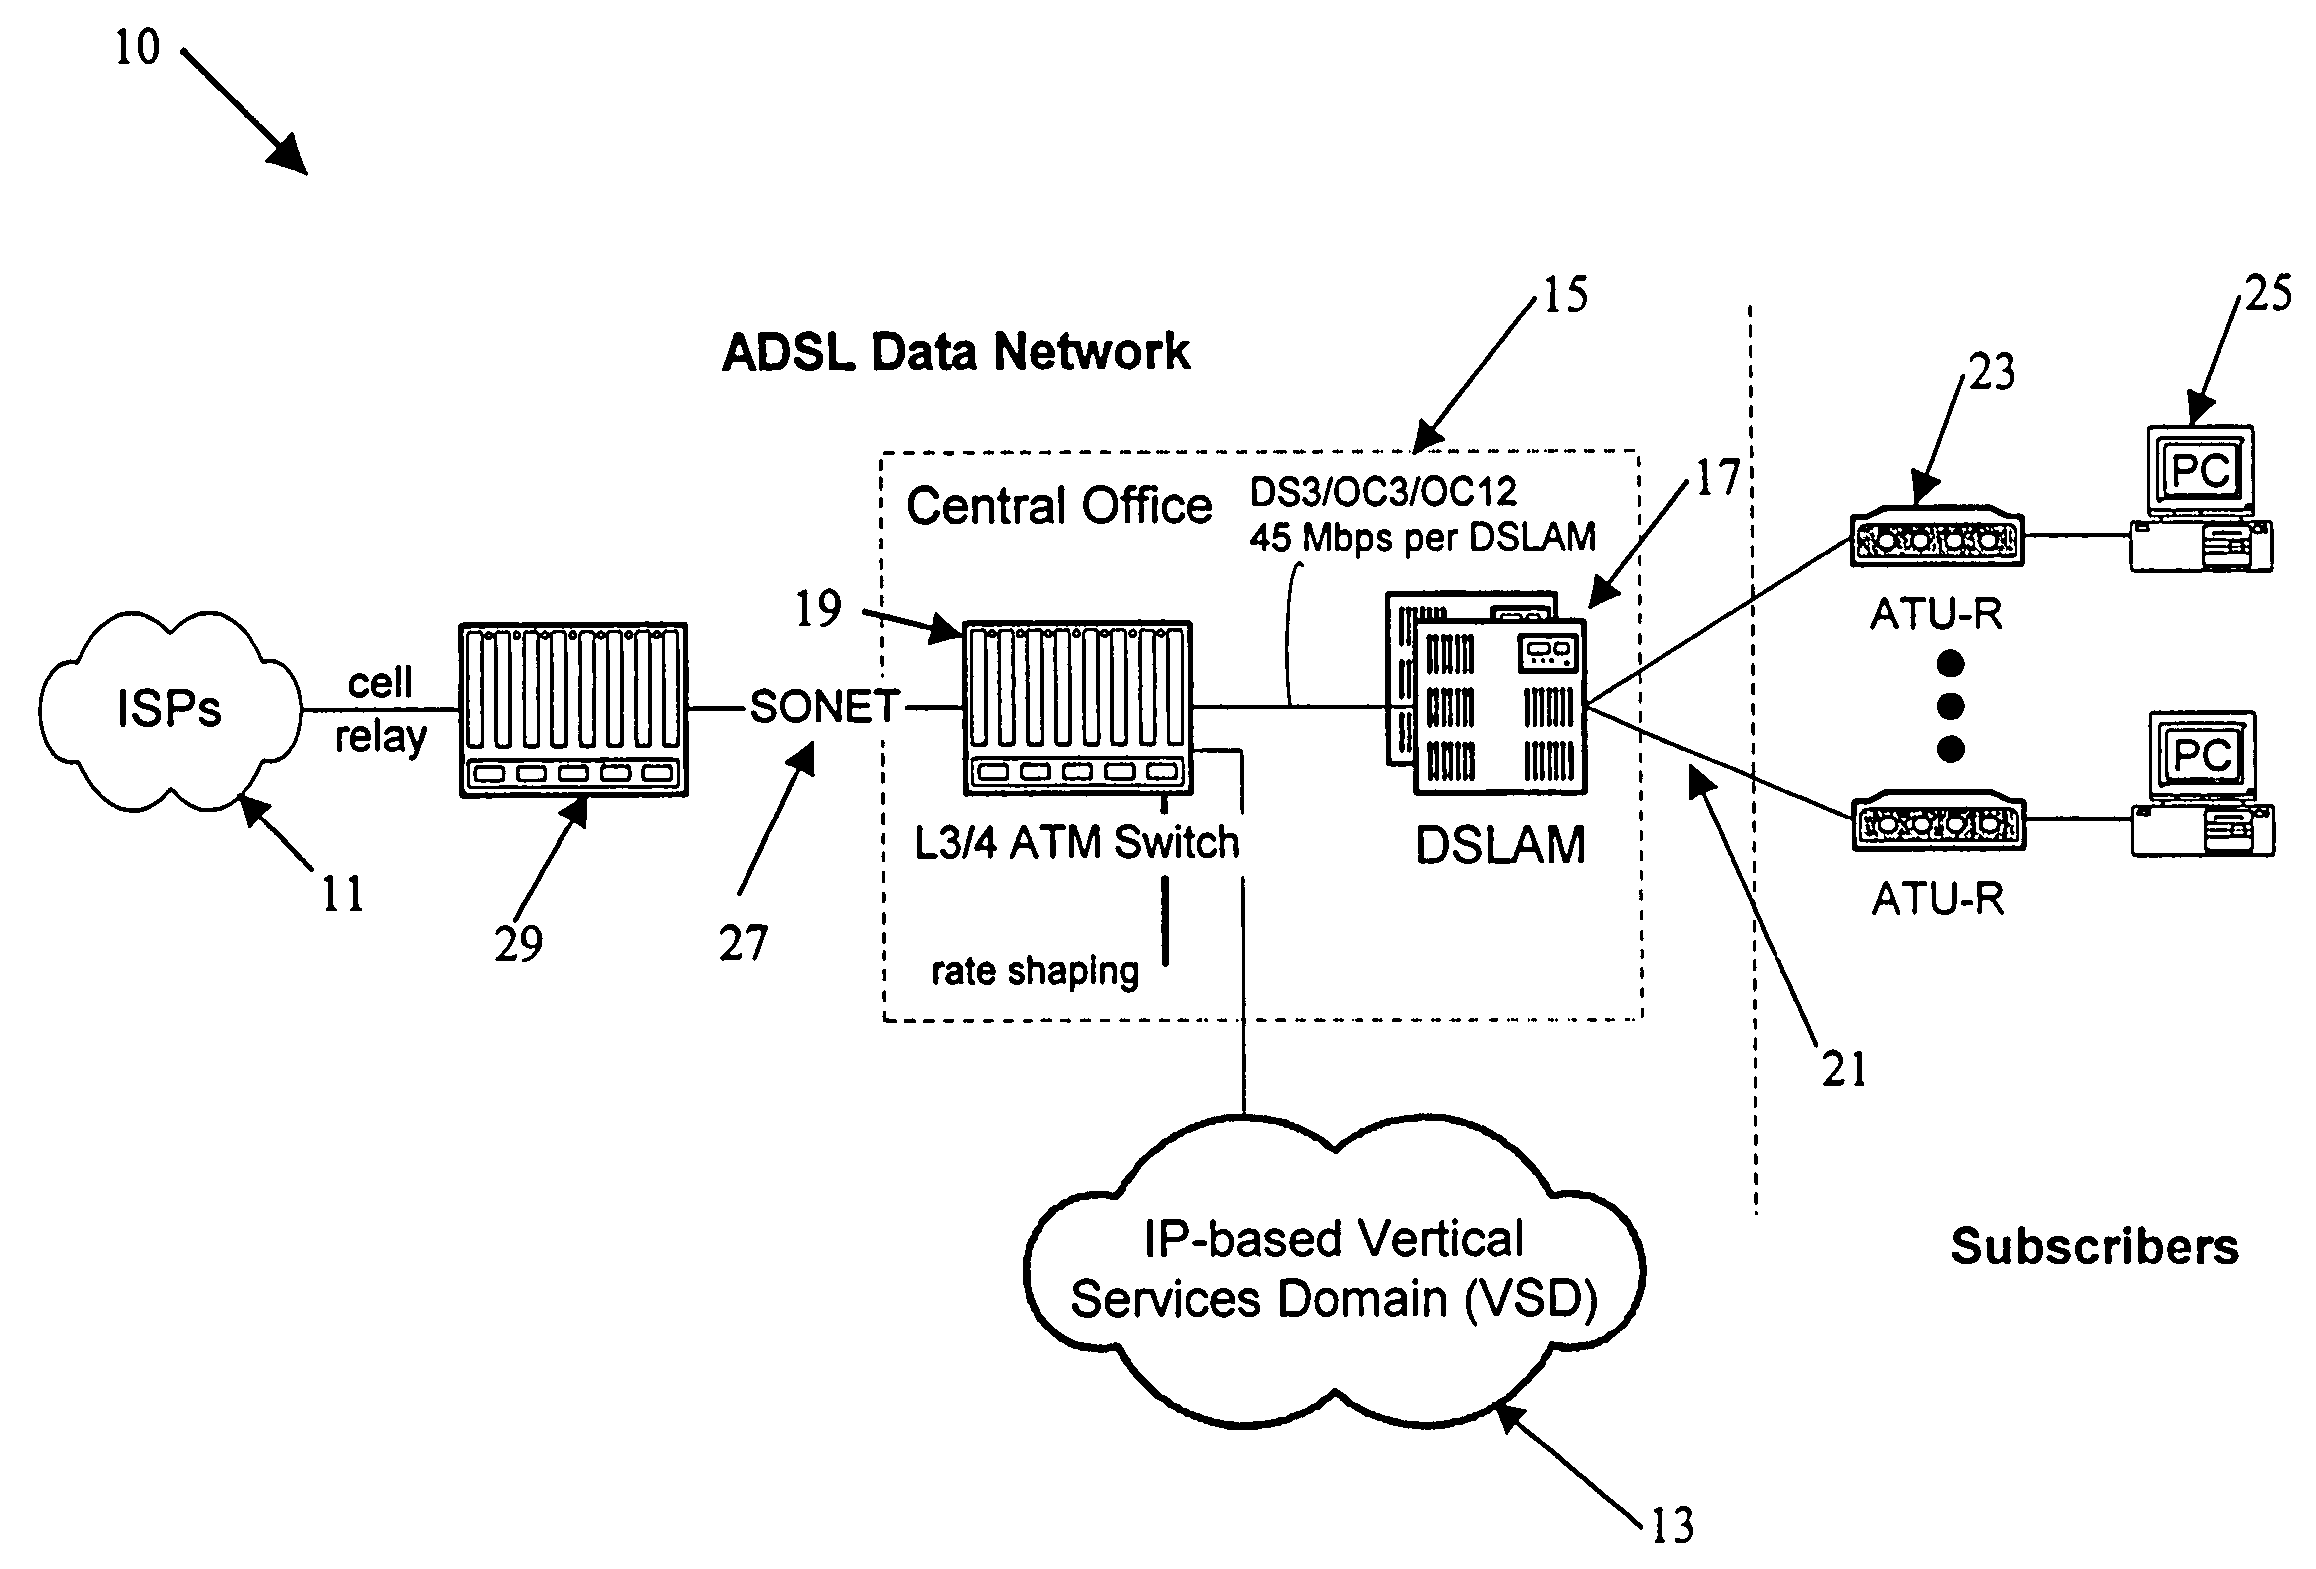 Congestion and throughput visibility and isolation